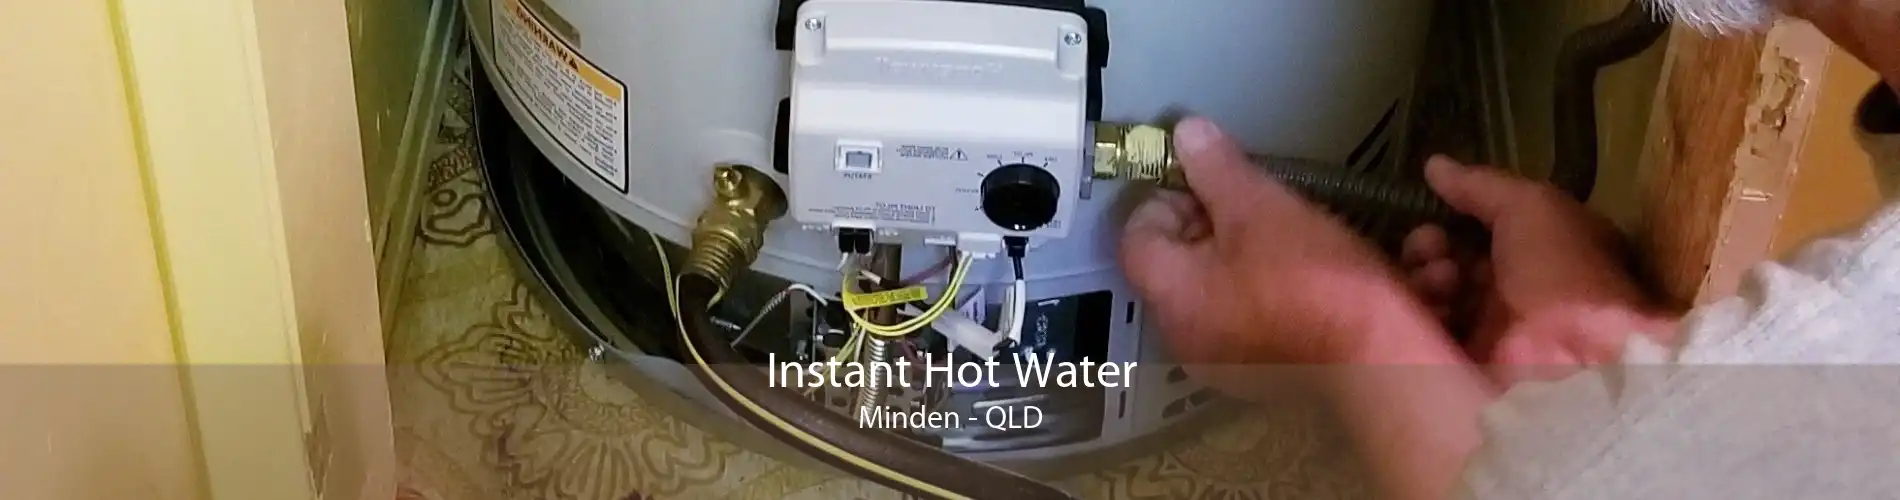 Instant Hot Water Minden - QLD